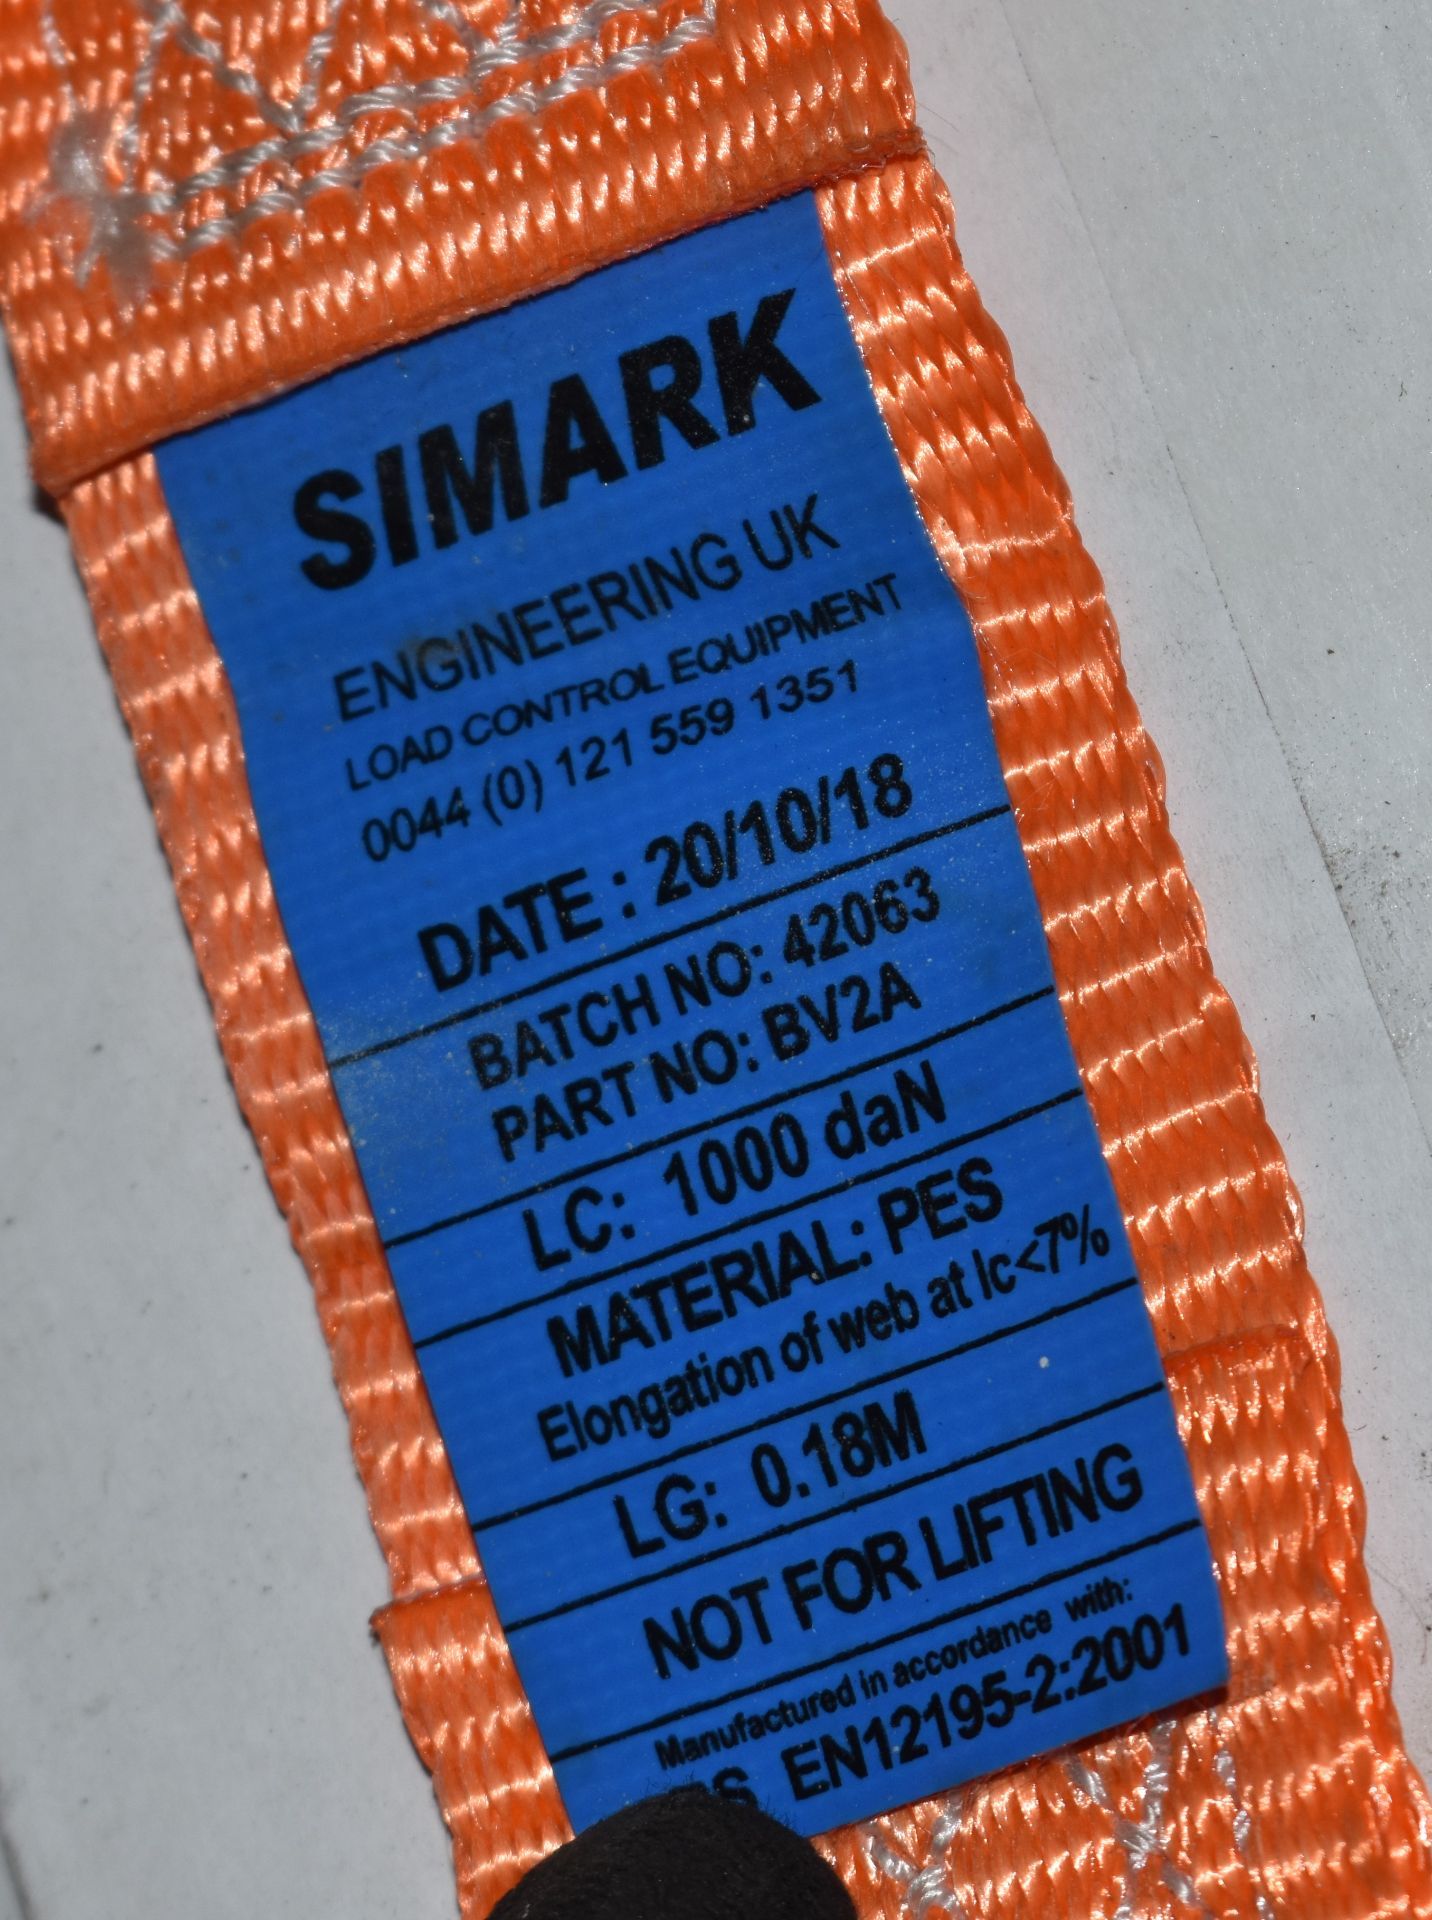 10 x Simark Load Control Cargo Vehicle Straps - 1000 daN, PES Material, 0.18m Length - CL622 - Ref - Image 2 of 4